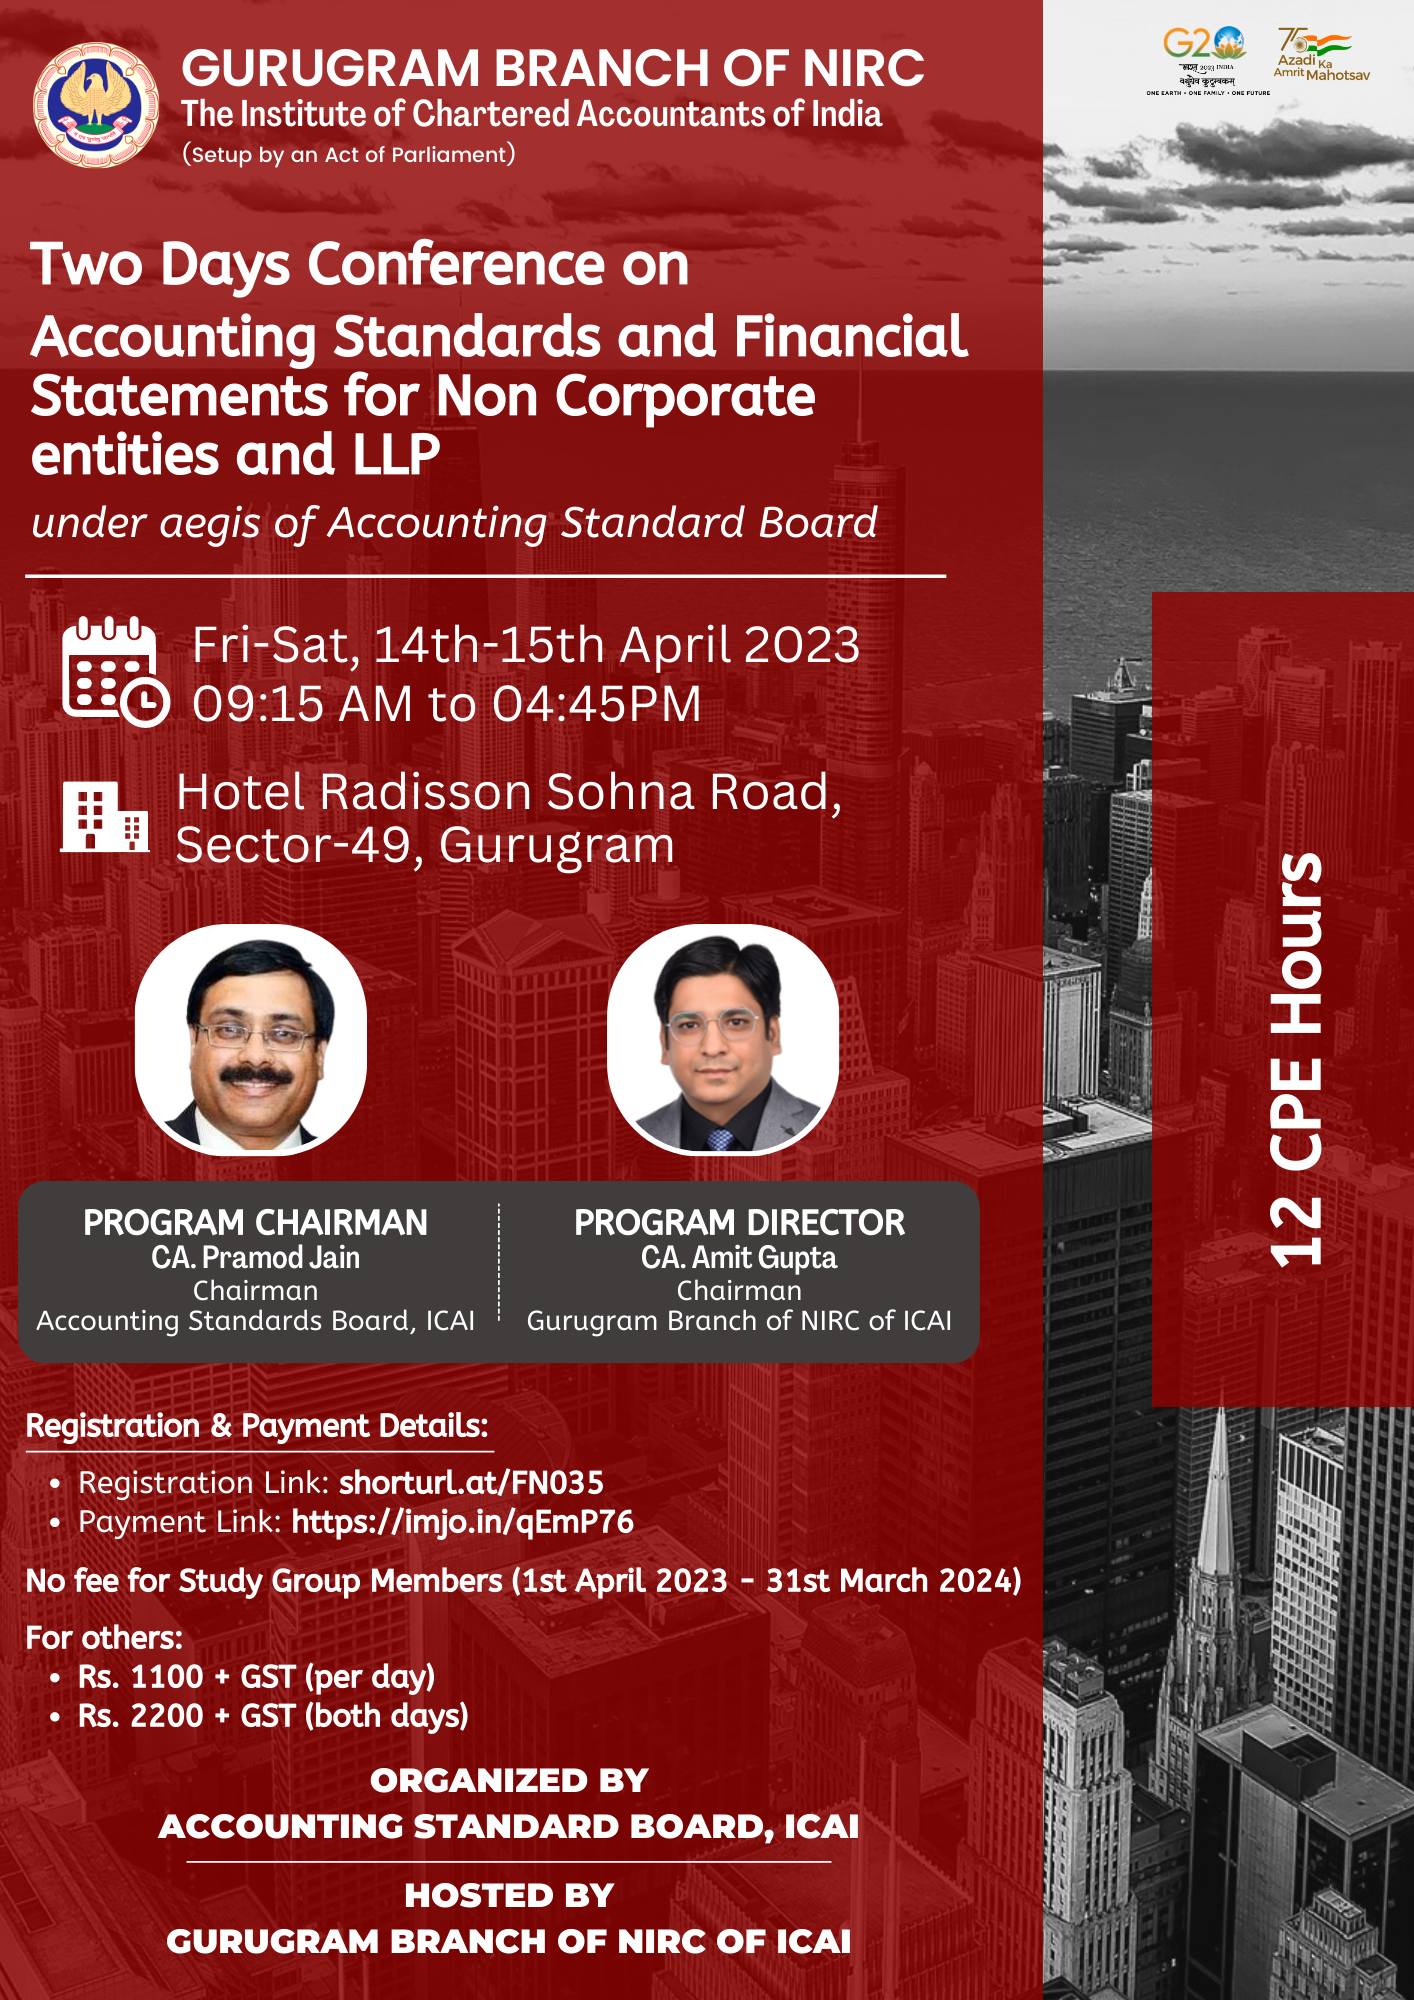 Two Days Conference on Accounting Standards